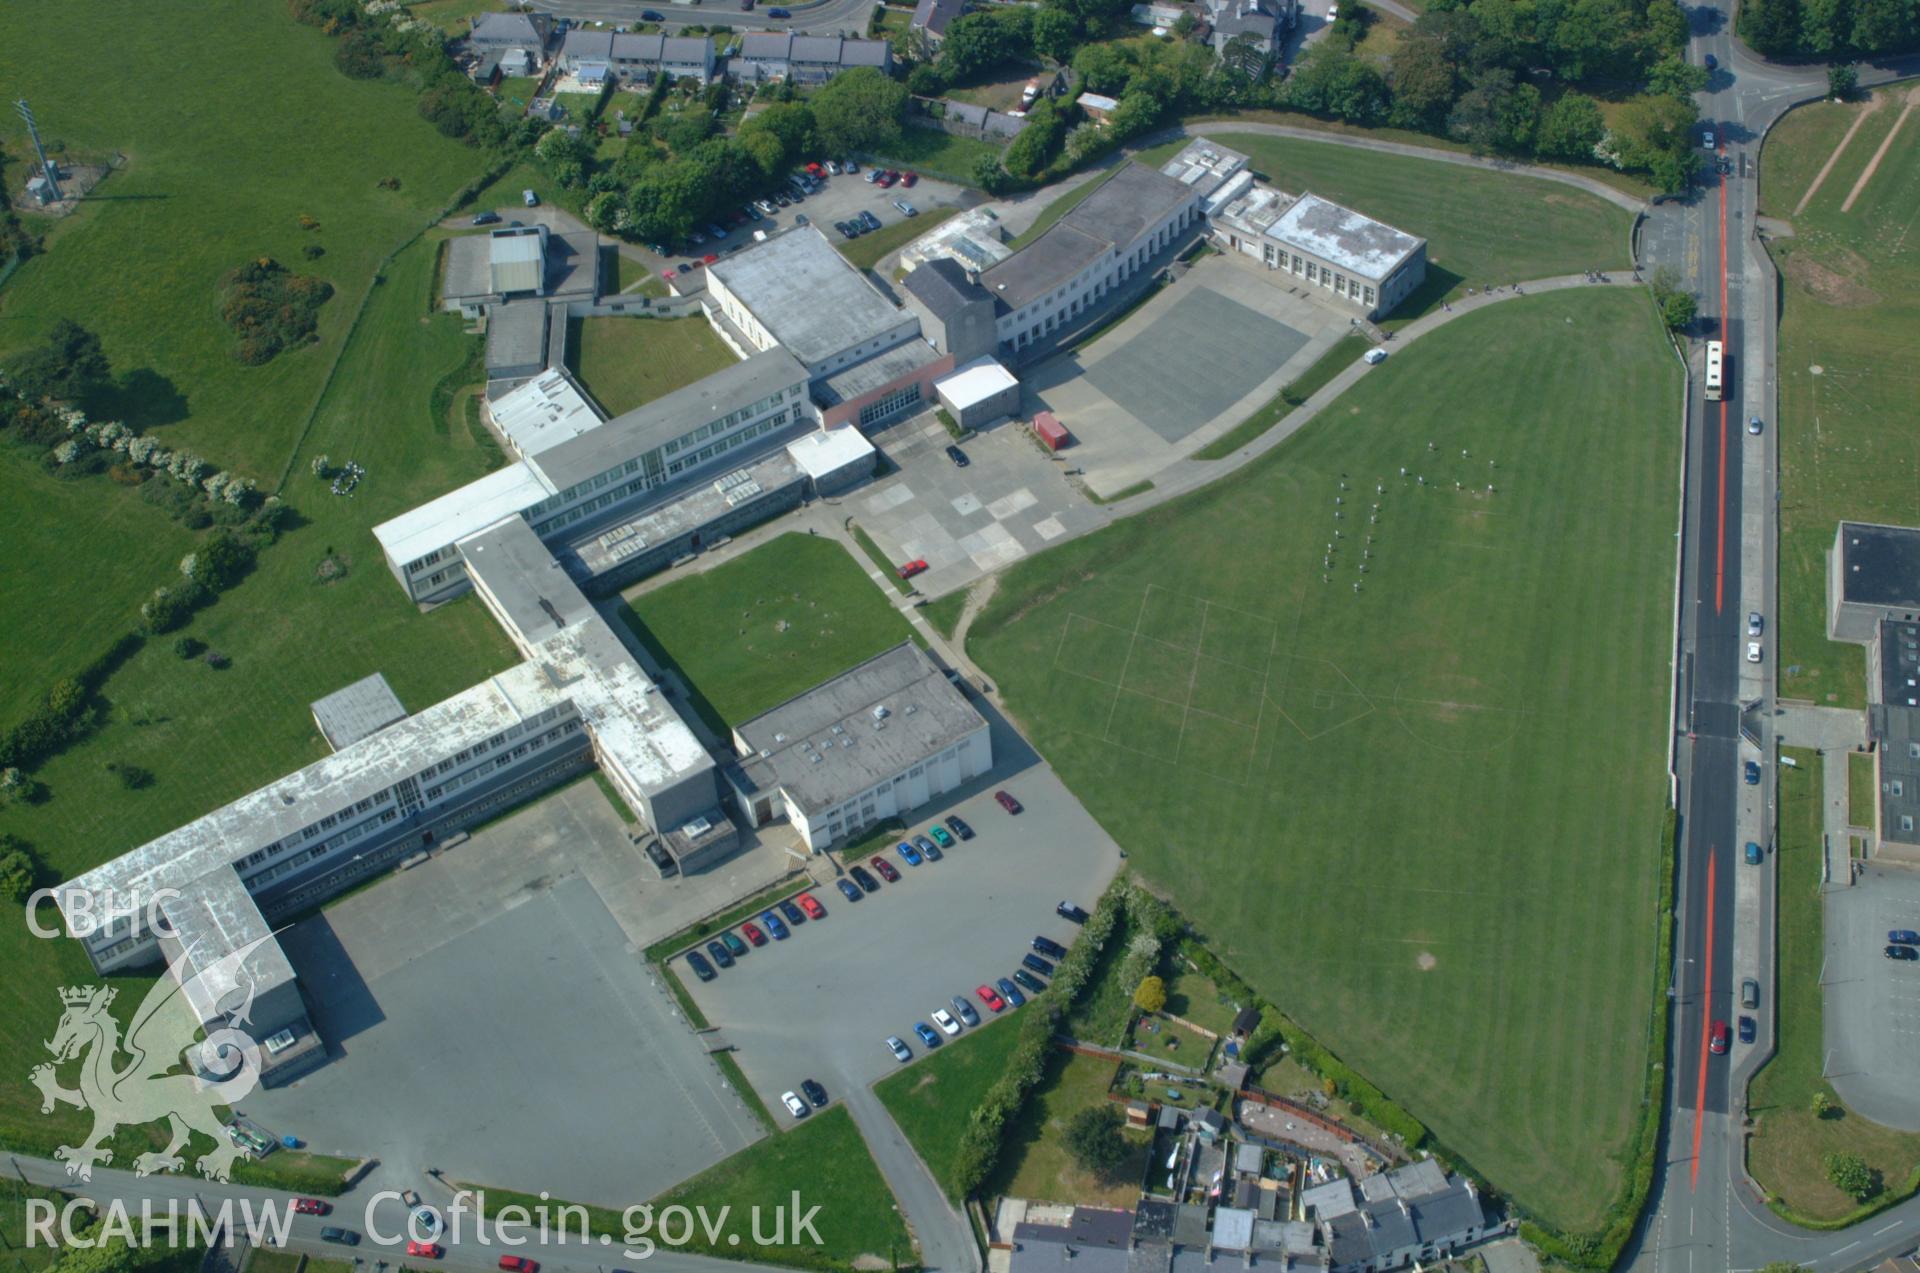 RCAHMW colour oblique aerial photograph of Ysgol Syr Thomas Jones, Amlwch. Taken on 26 May 2004 by Toby Driver